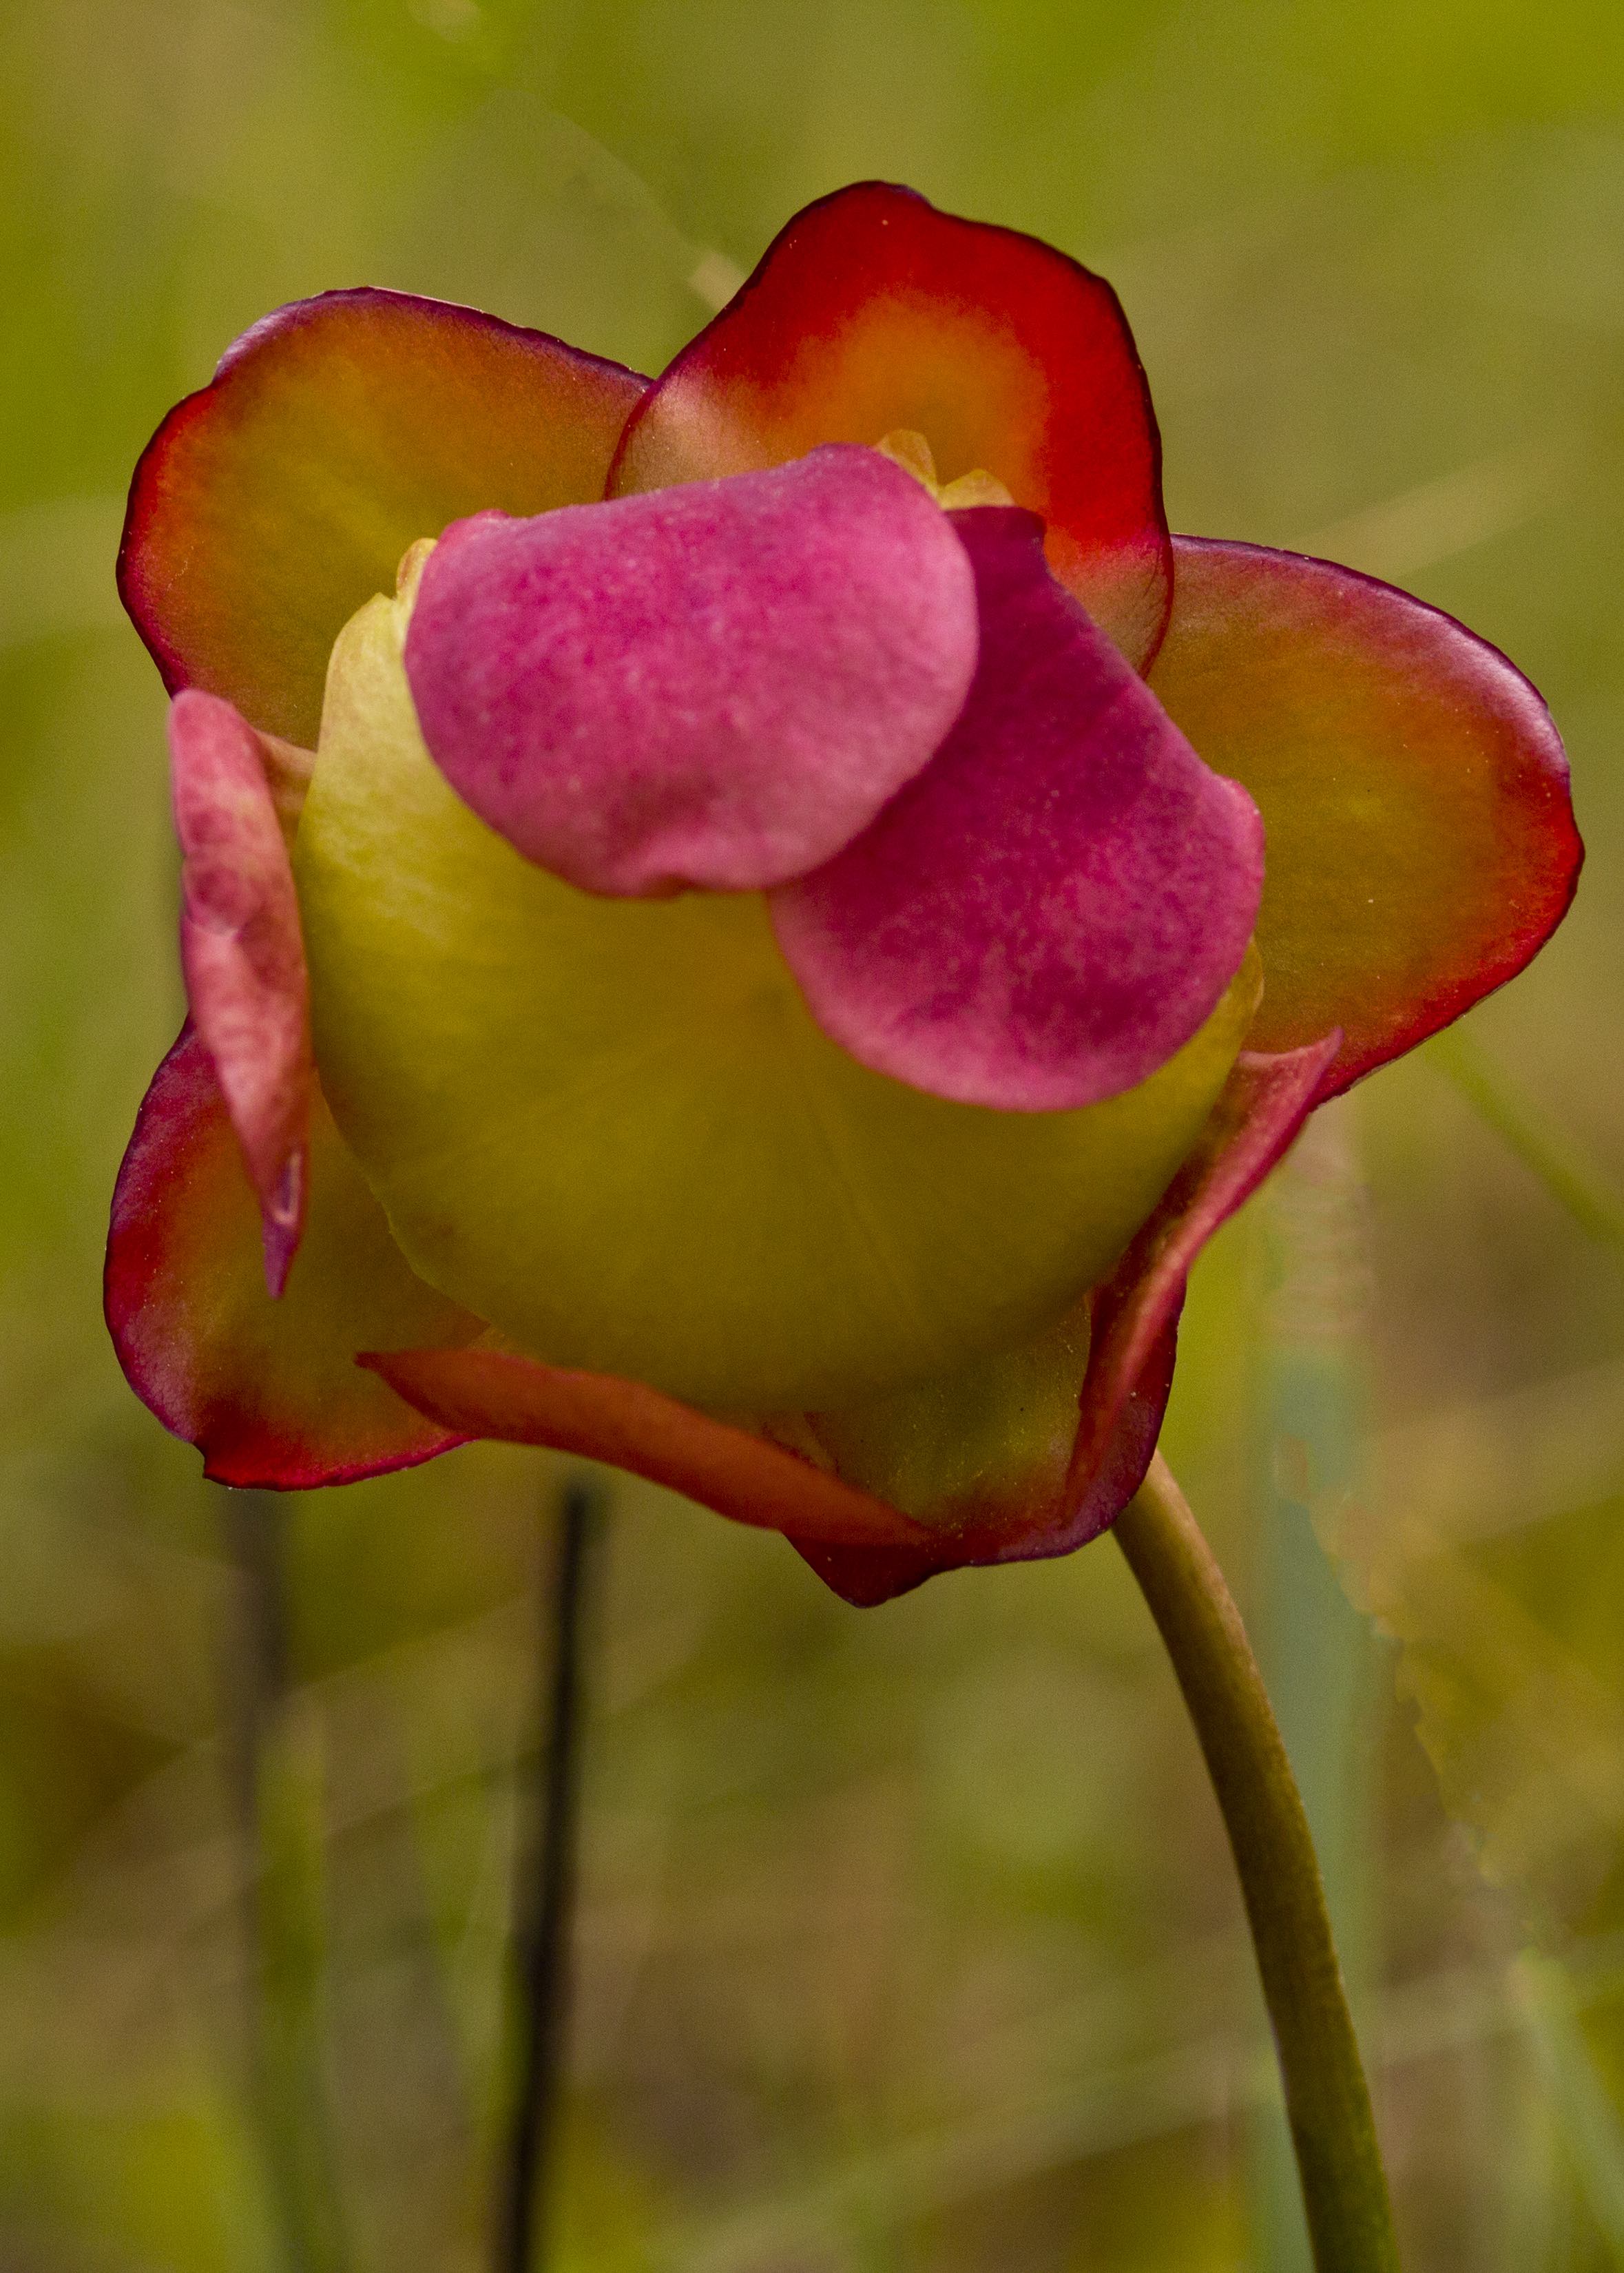 The Scientific Name is Sarracenia purpurea var. venosa. You will likely hear them called Southern Purple Pitcherplant, Pitcher-plant. This picture shows the  of Sarracenia purpurea var. venosa